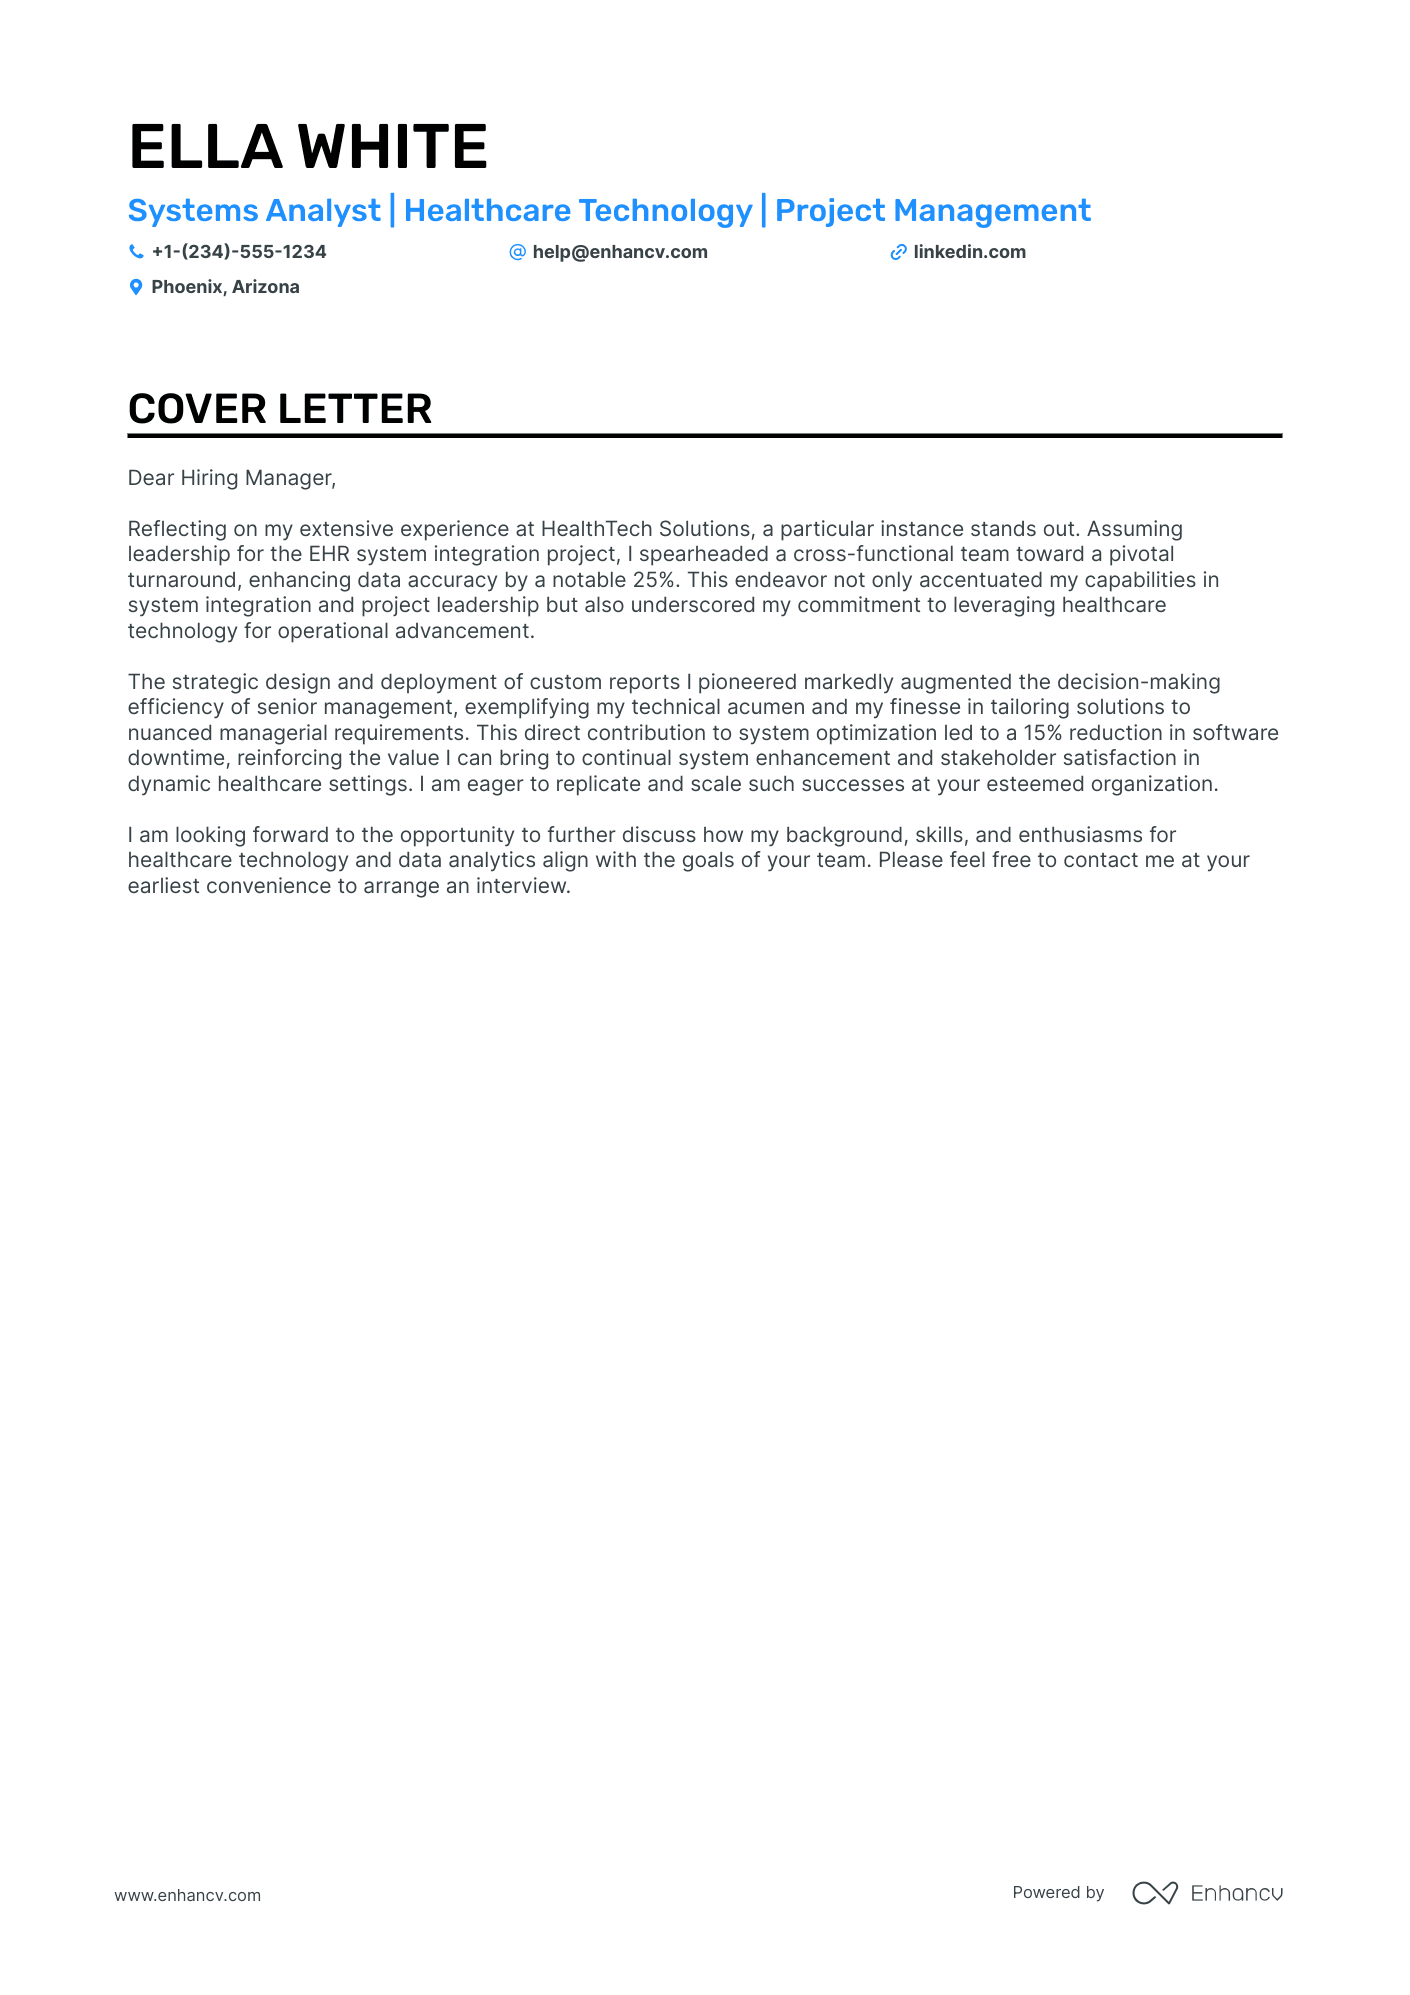 System Analyst cover letter